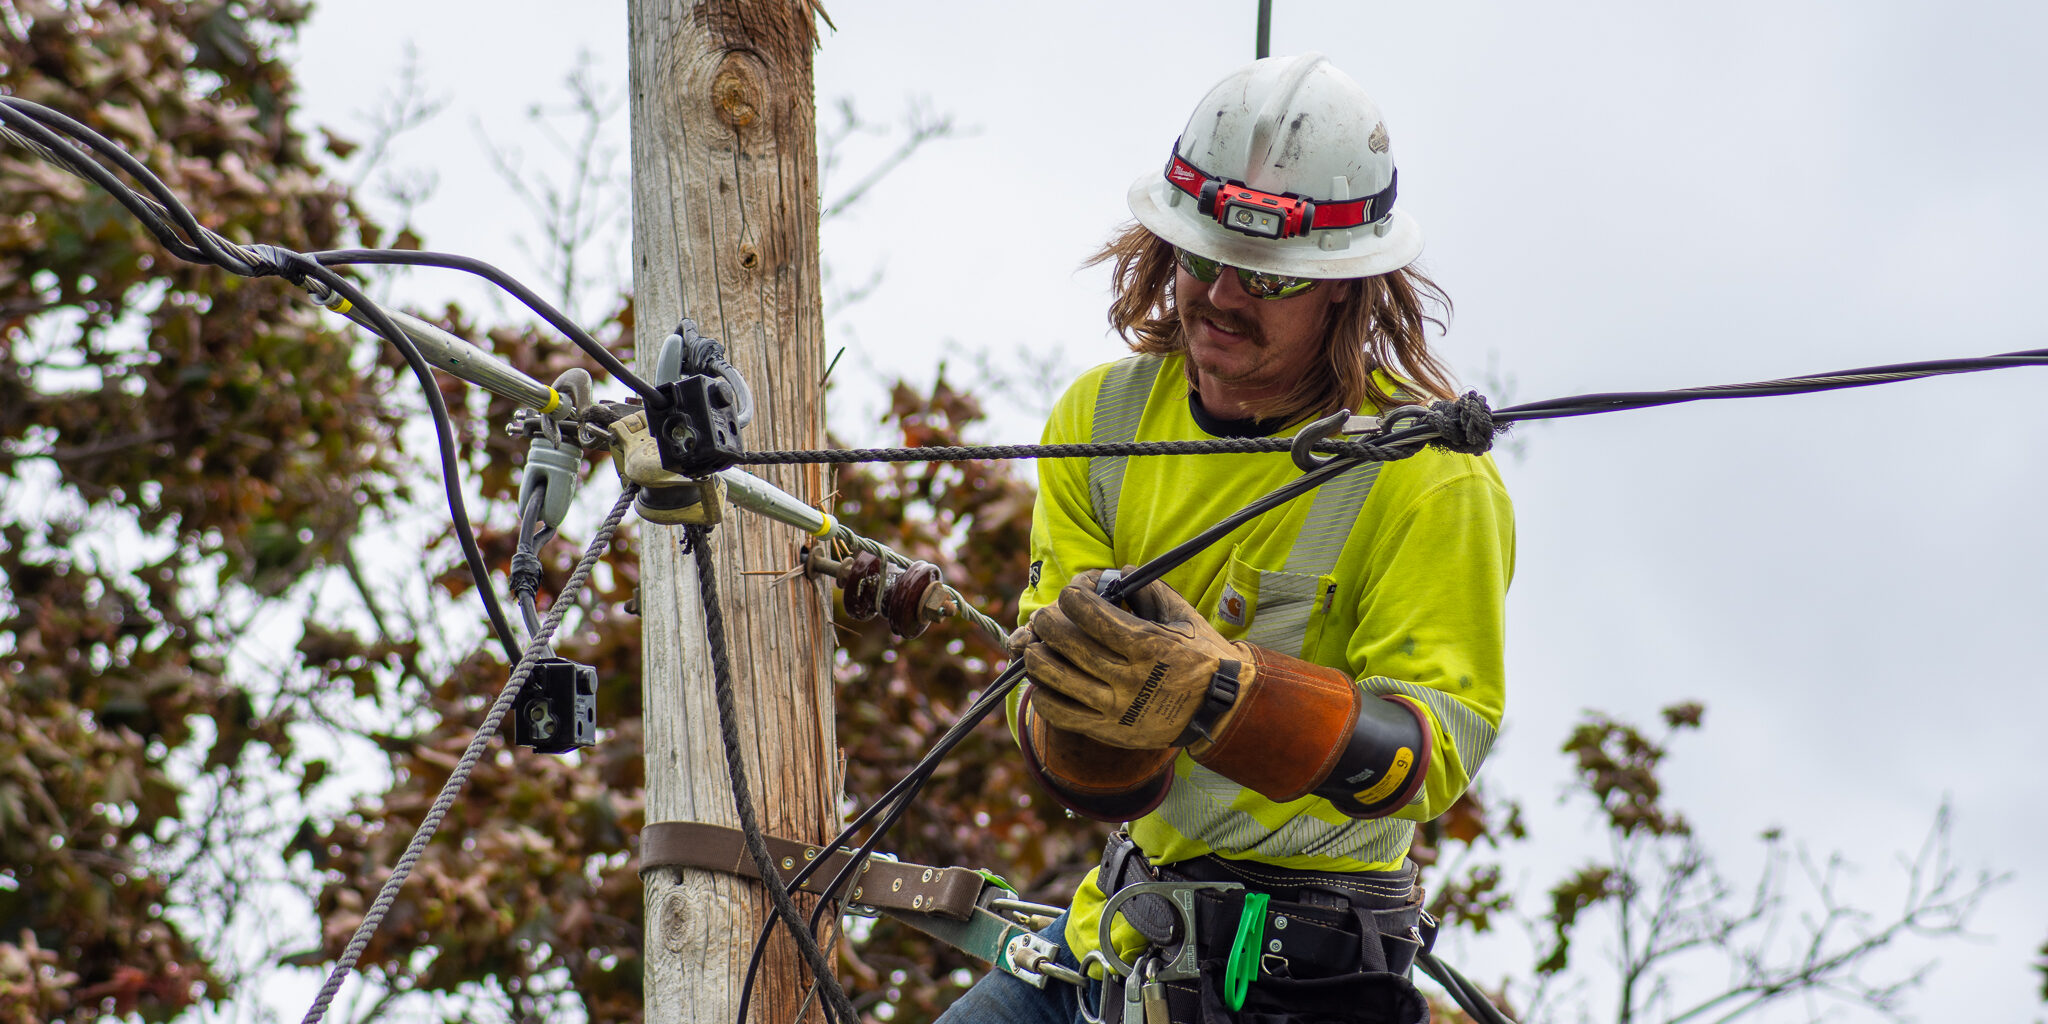 A WPS lineworker makes repairs to a power line on a utility pole.